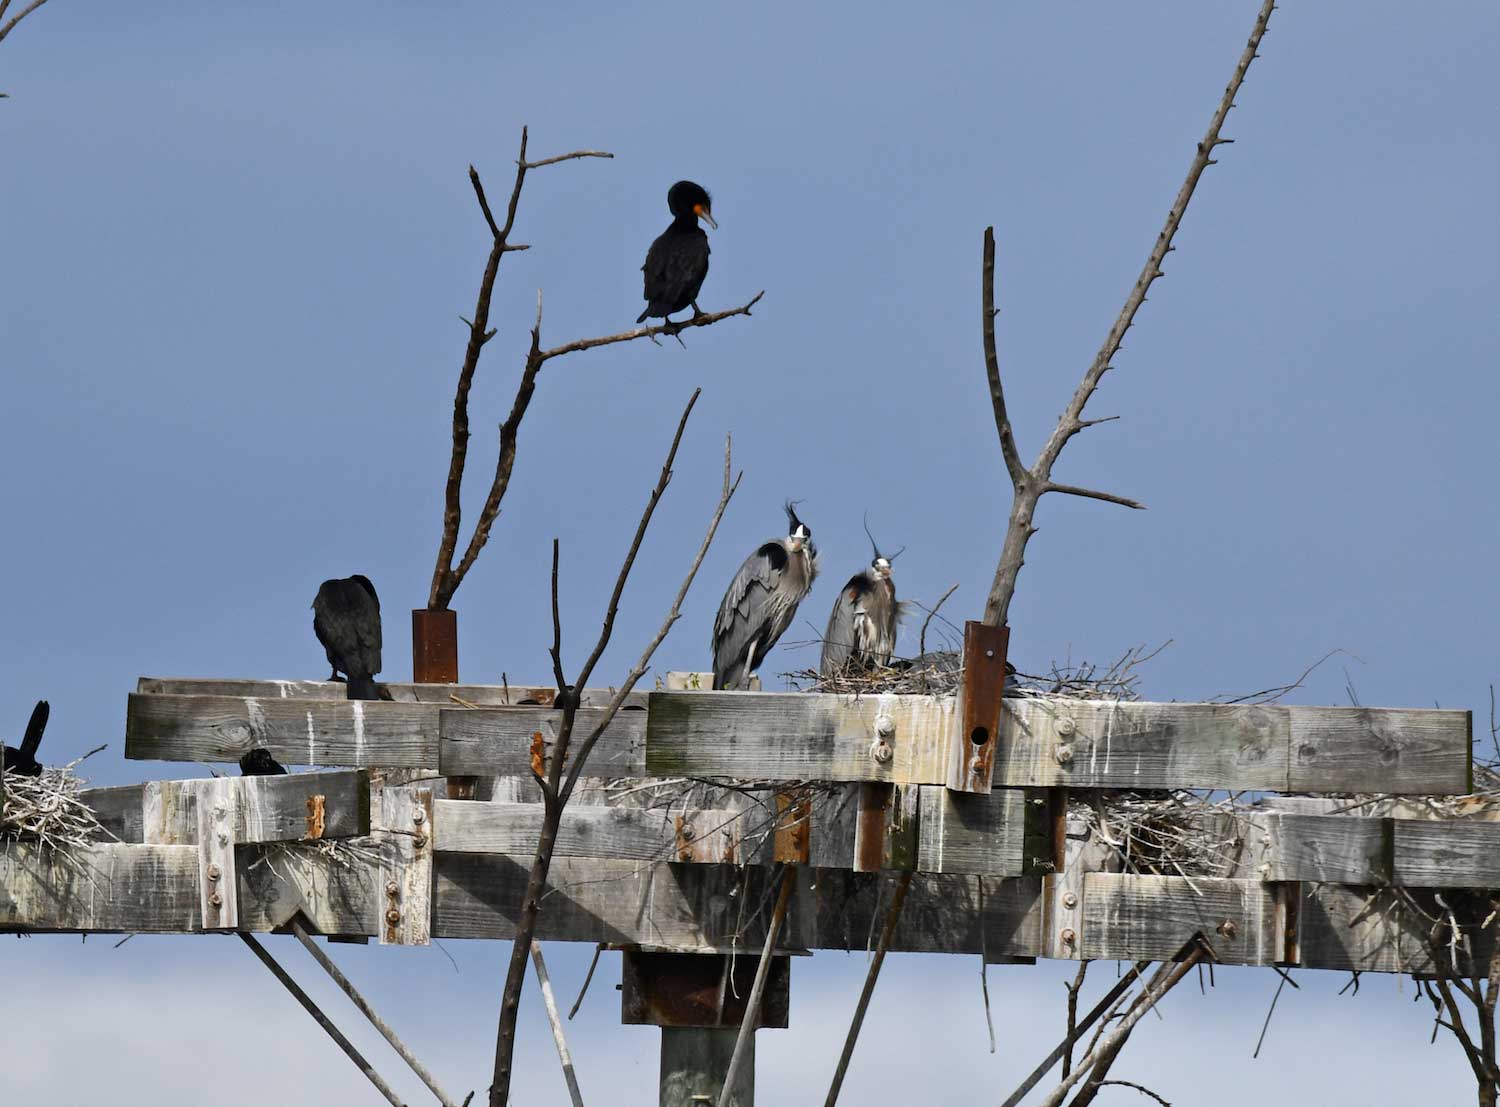 Double-crested cormorants and great blue herons perched in nesting platforms.